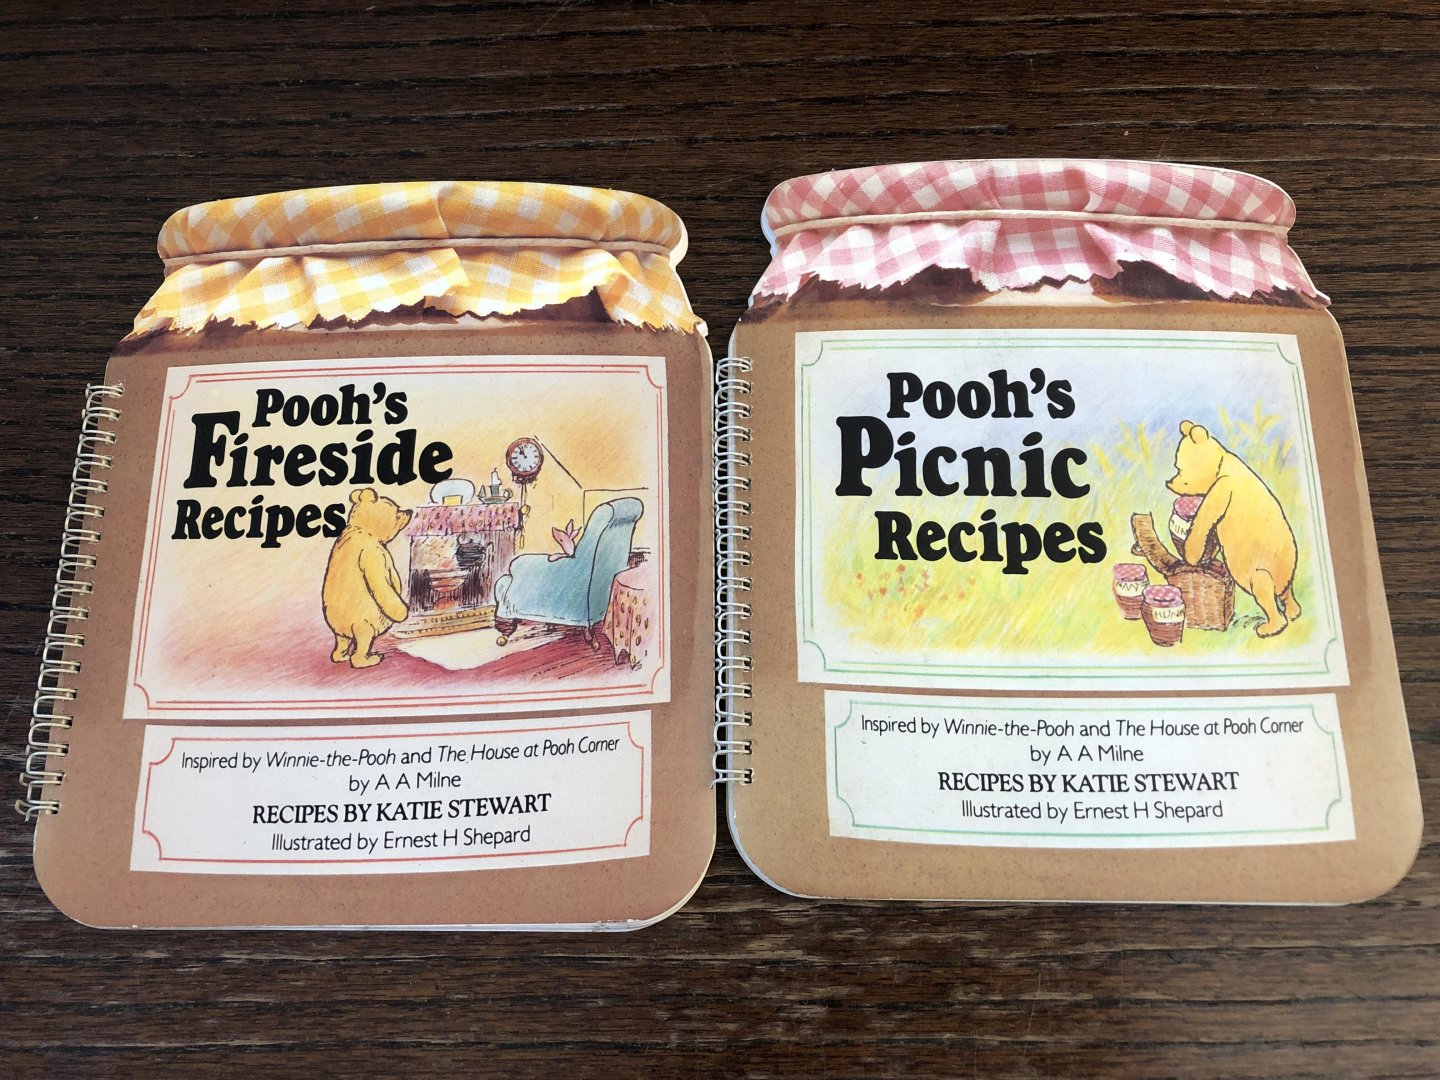 Katie Stewart - Pooh’s Fireside recipes & Pooh’s Picnic Recipes